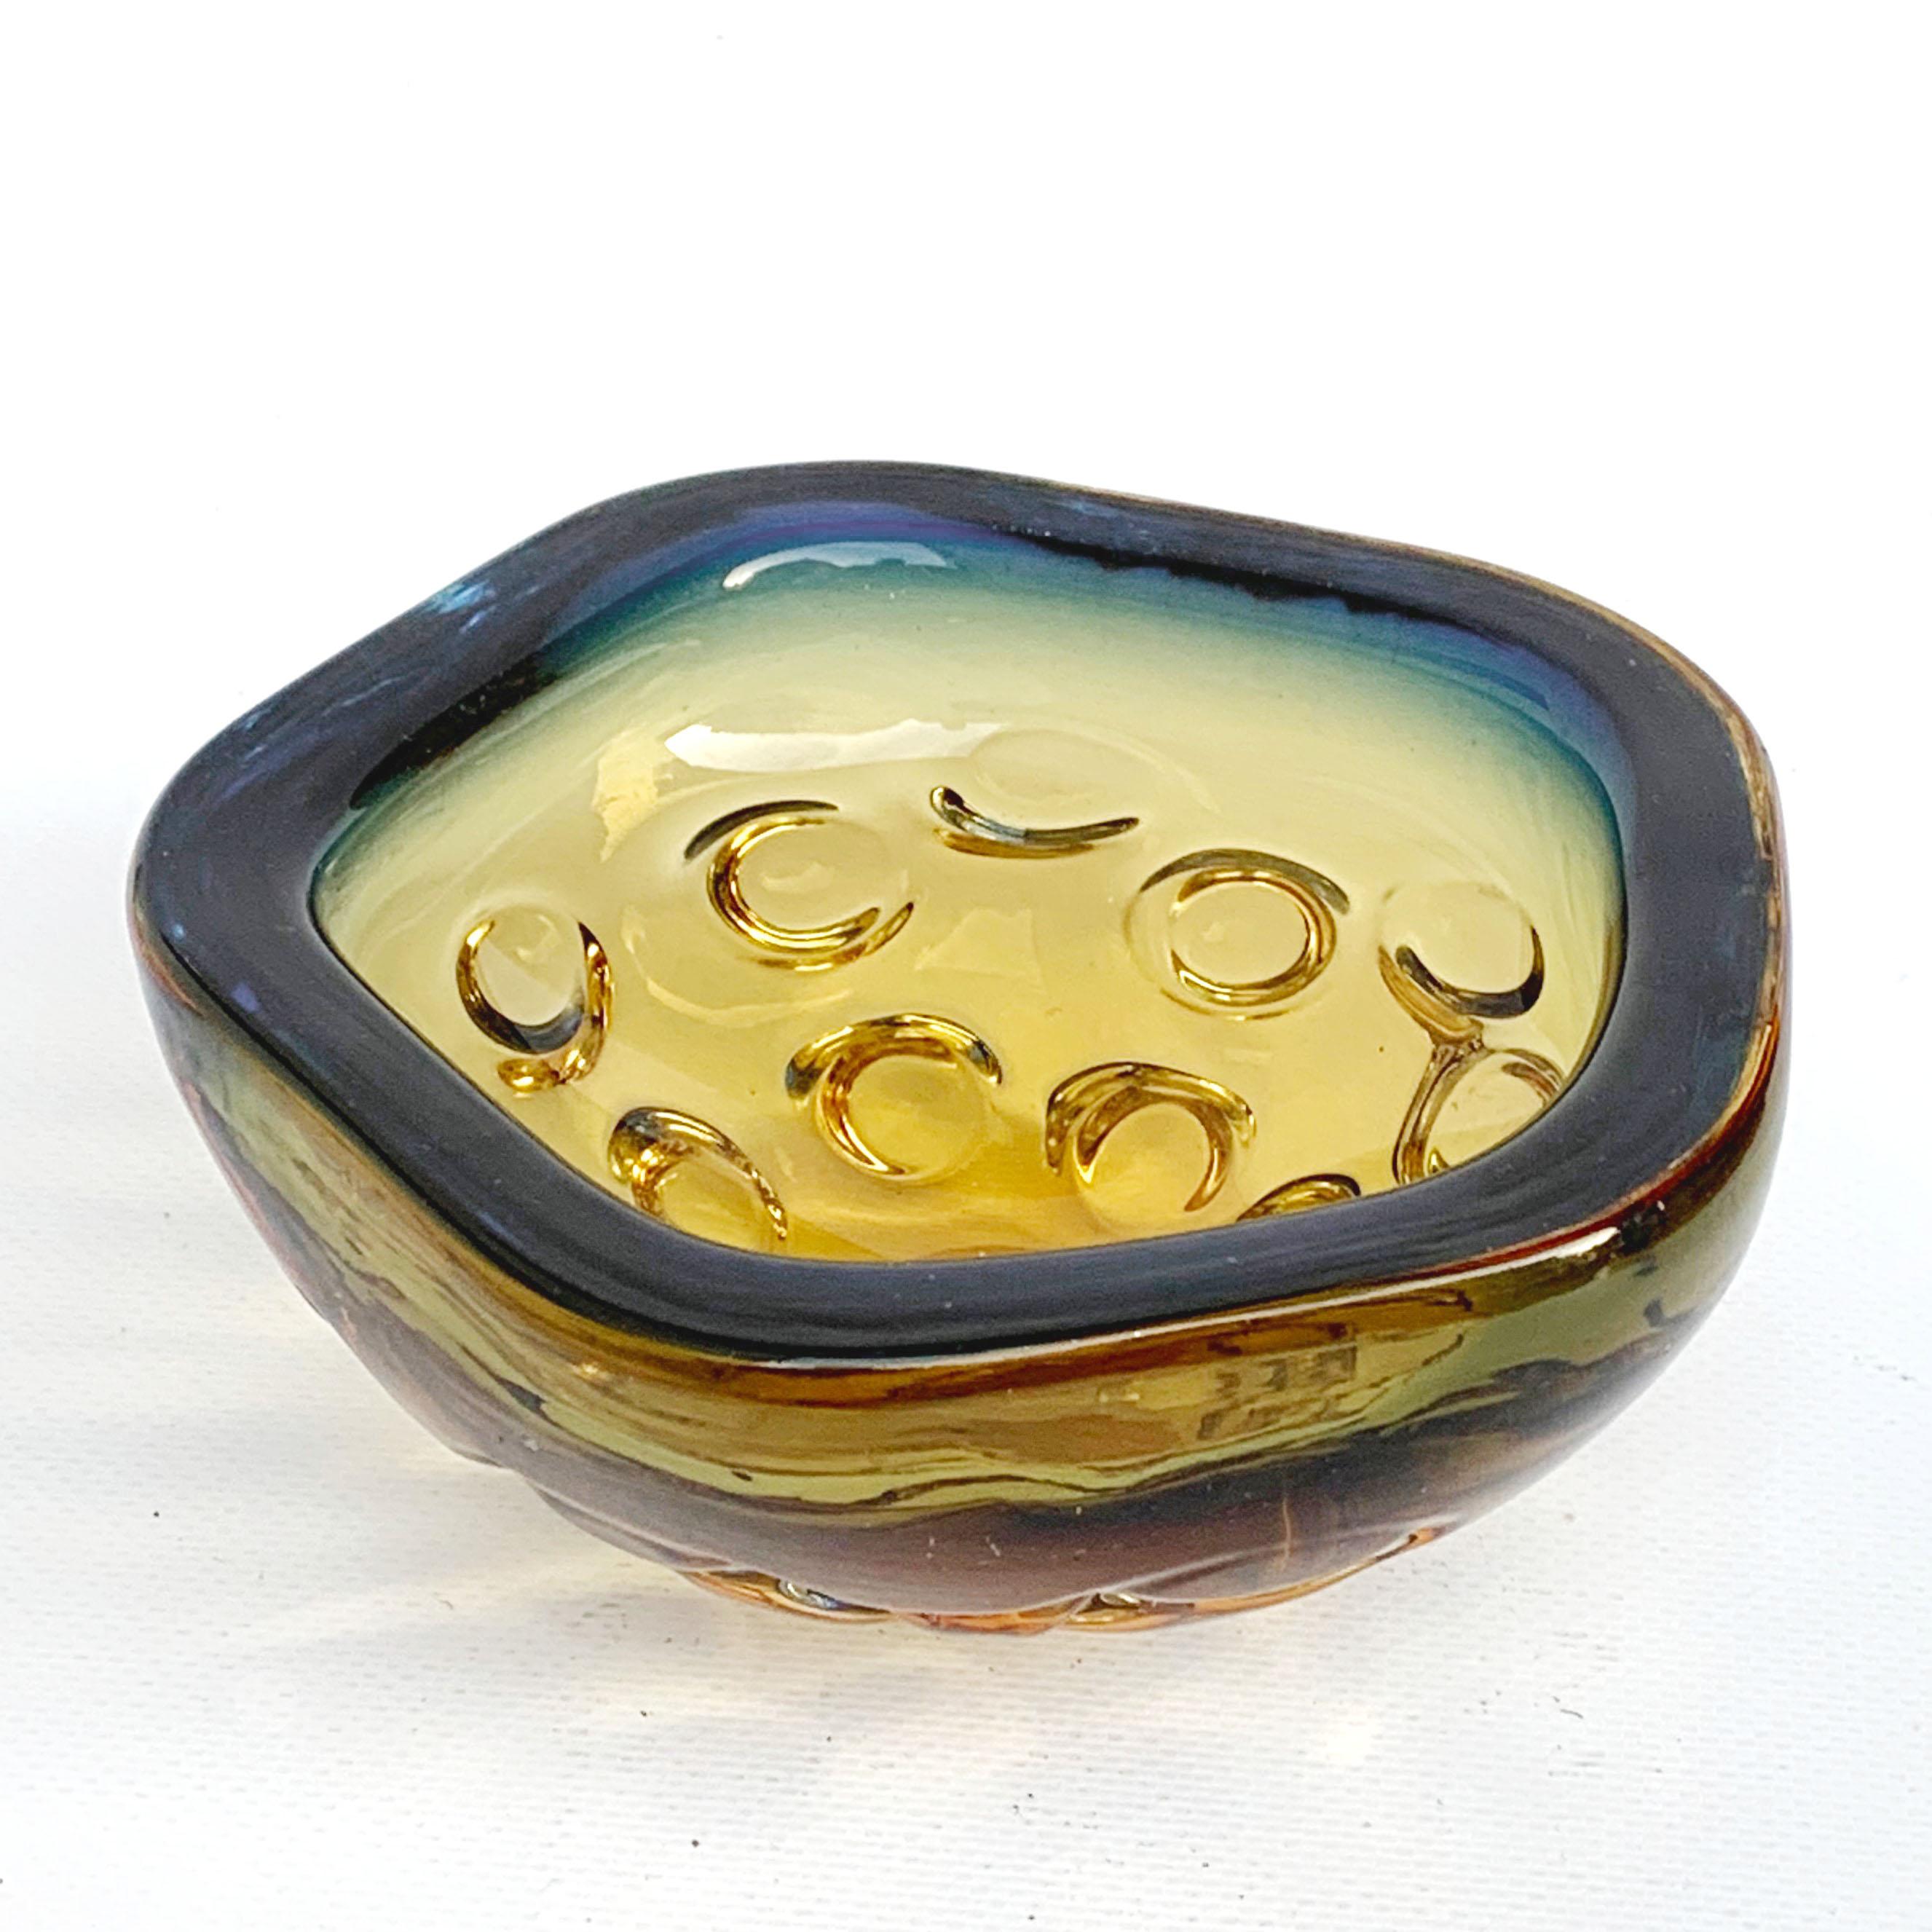 Rare bowl in Murano glass. Faded from amber to blue.
Glass submerged Murano, Italy, 1960s.
No chipping.